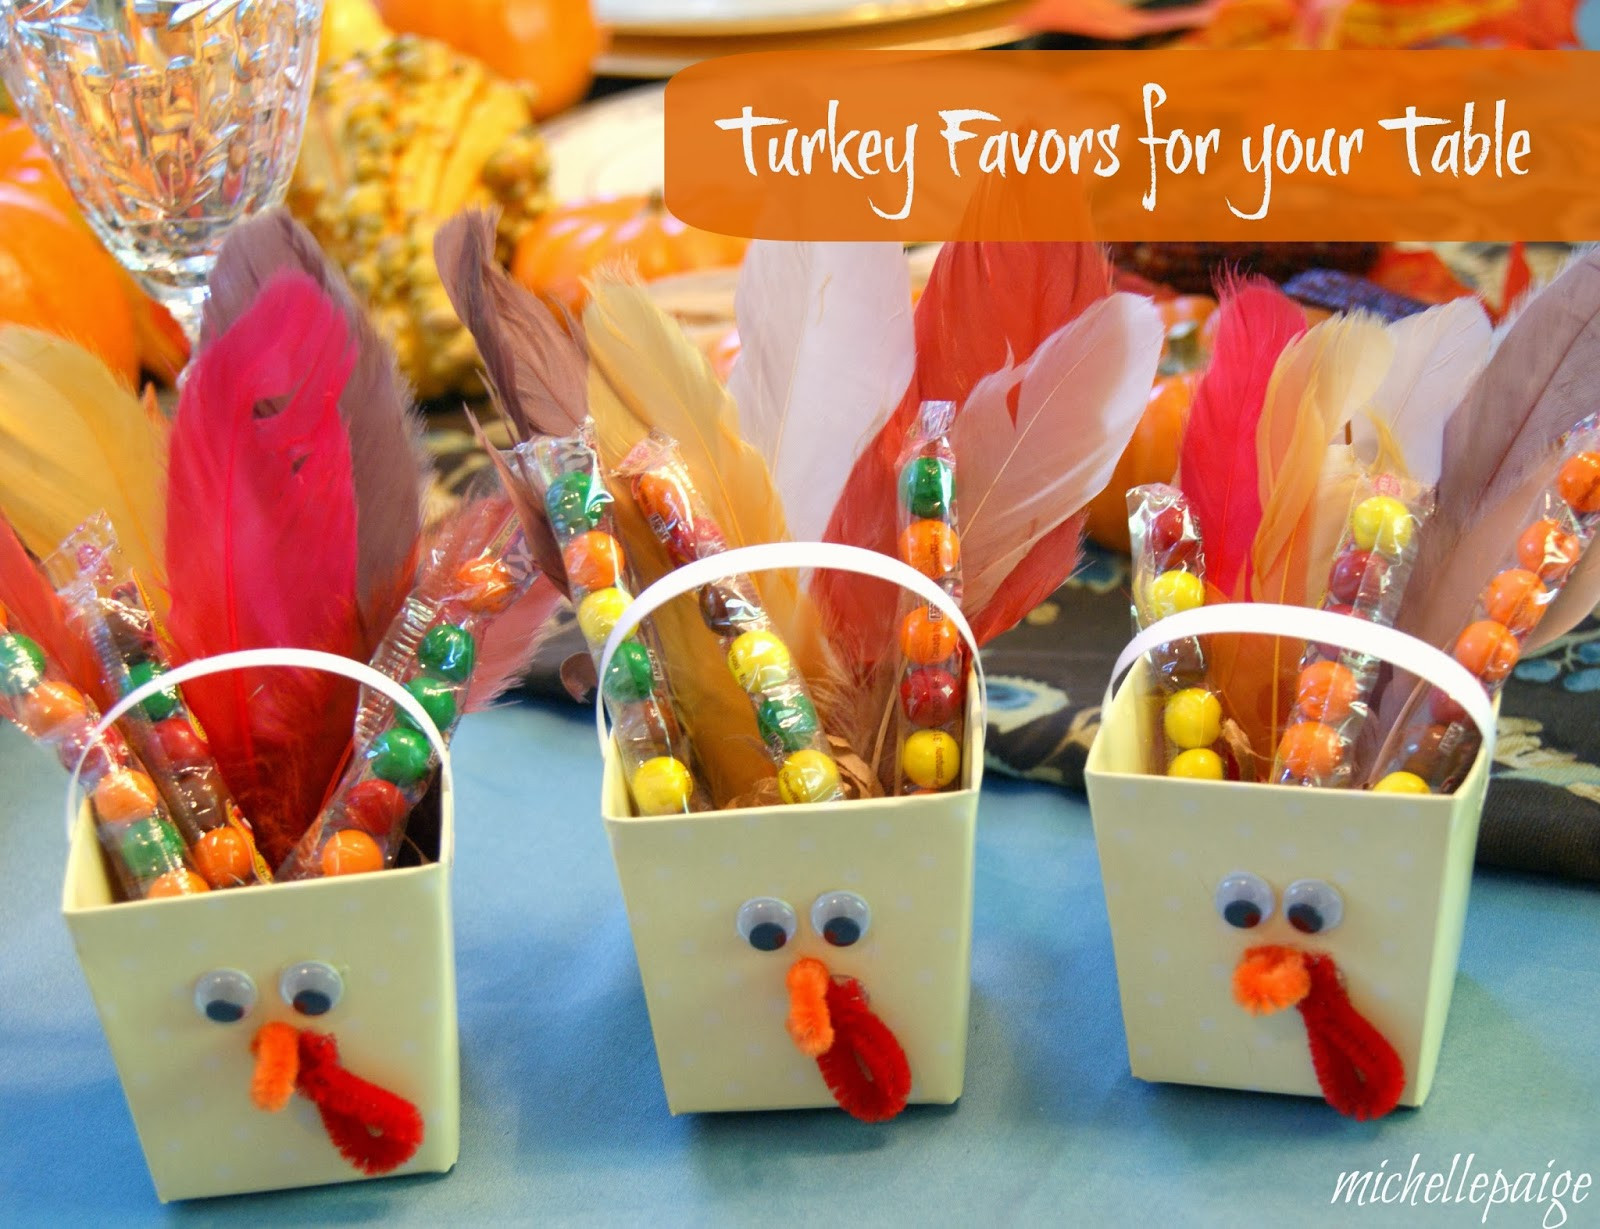 Thanksgiving Table Favors
 michelle paige blogs Candy Turkey Favors for Your Table